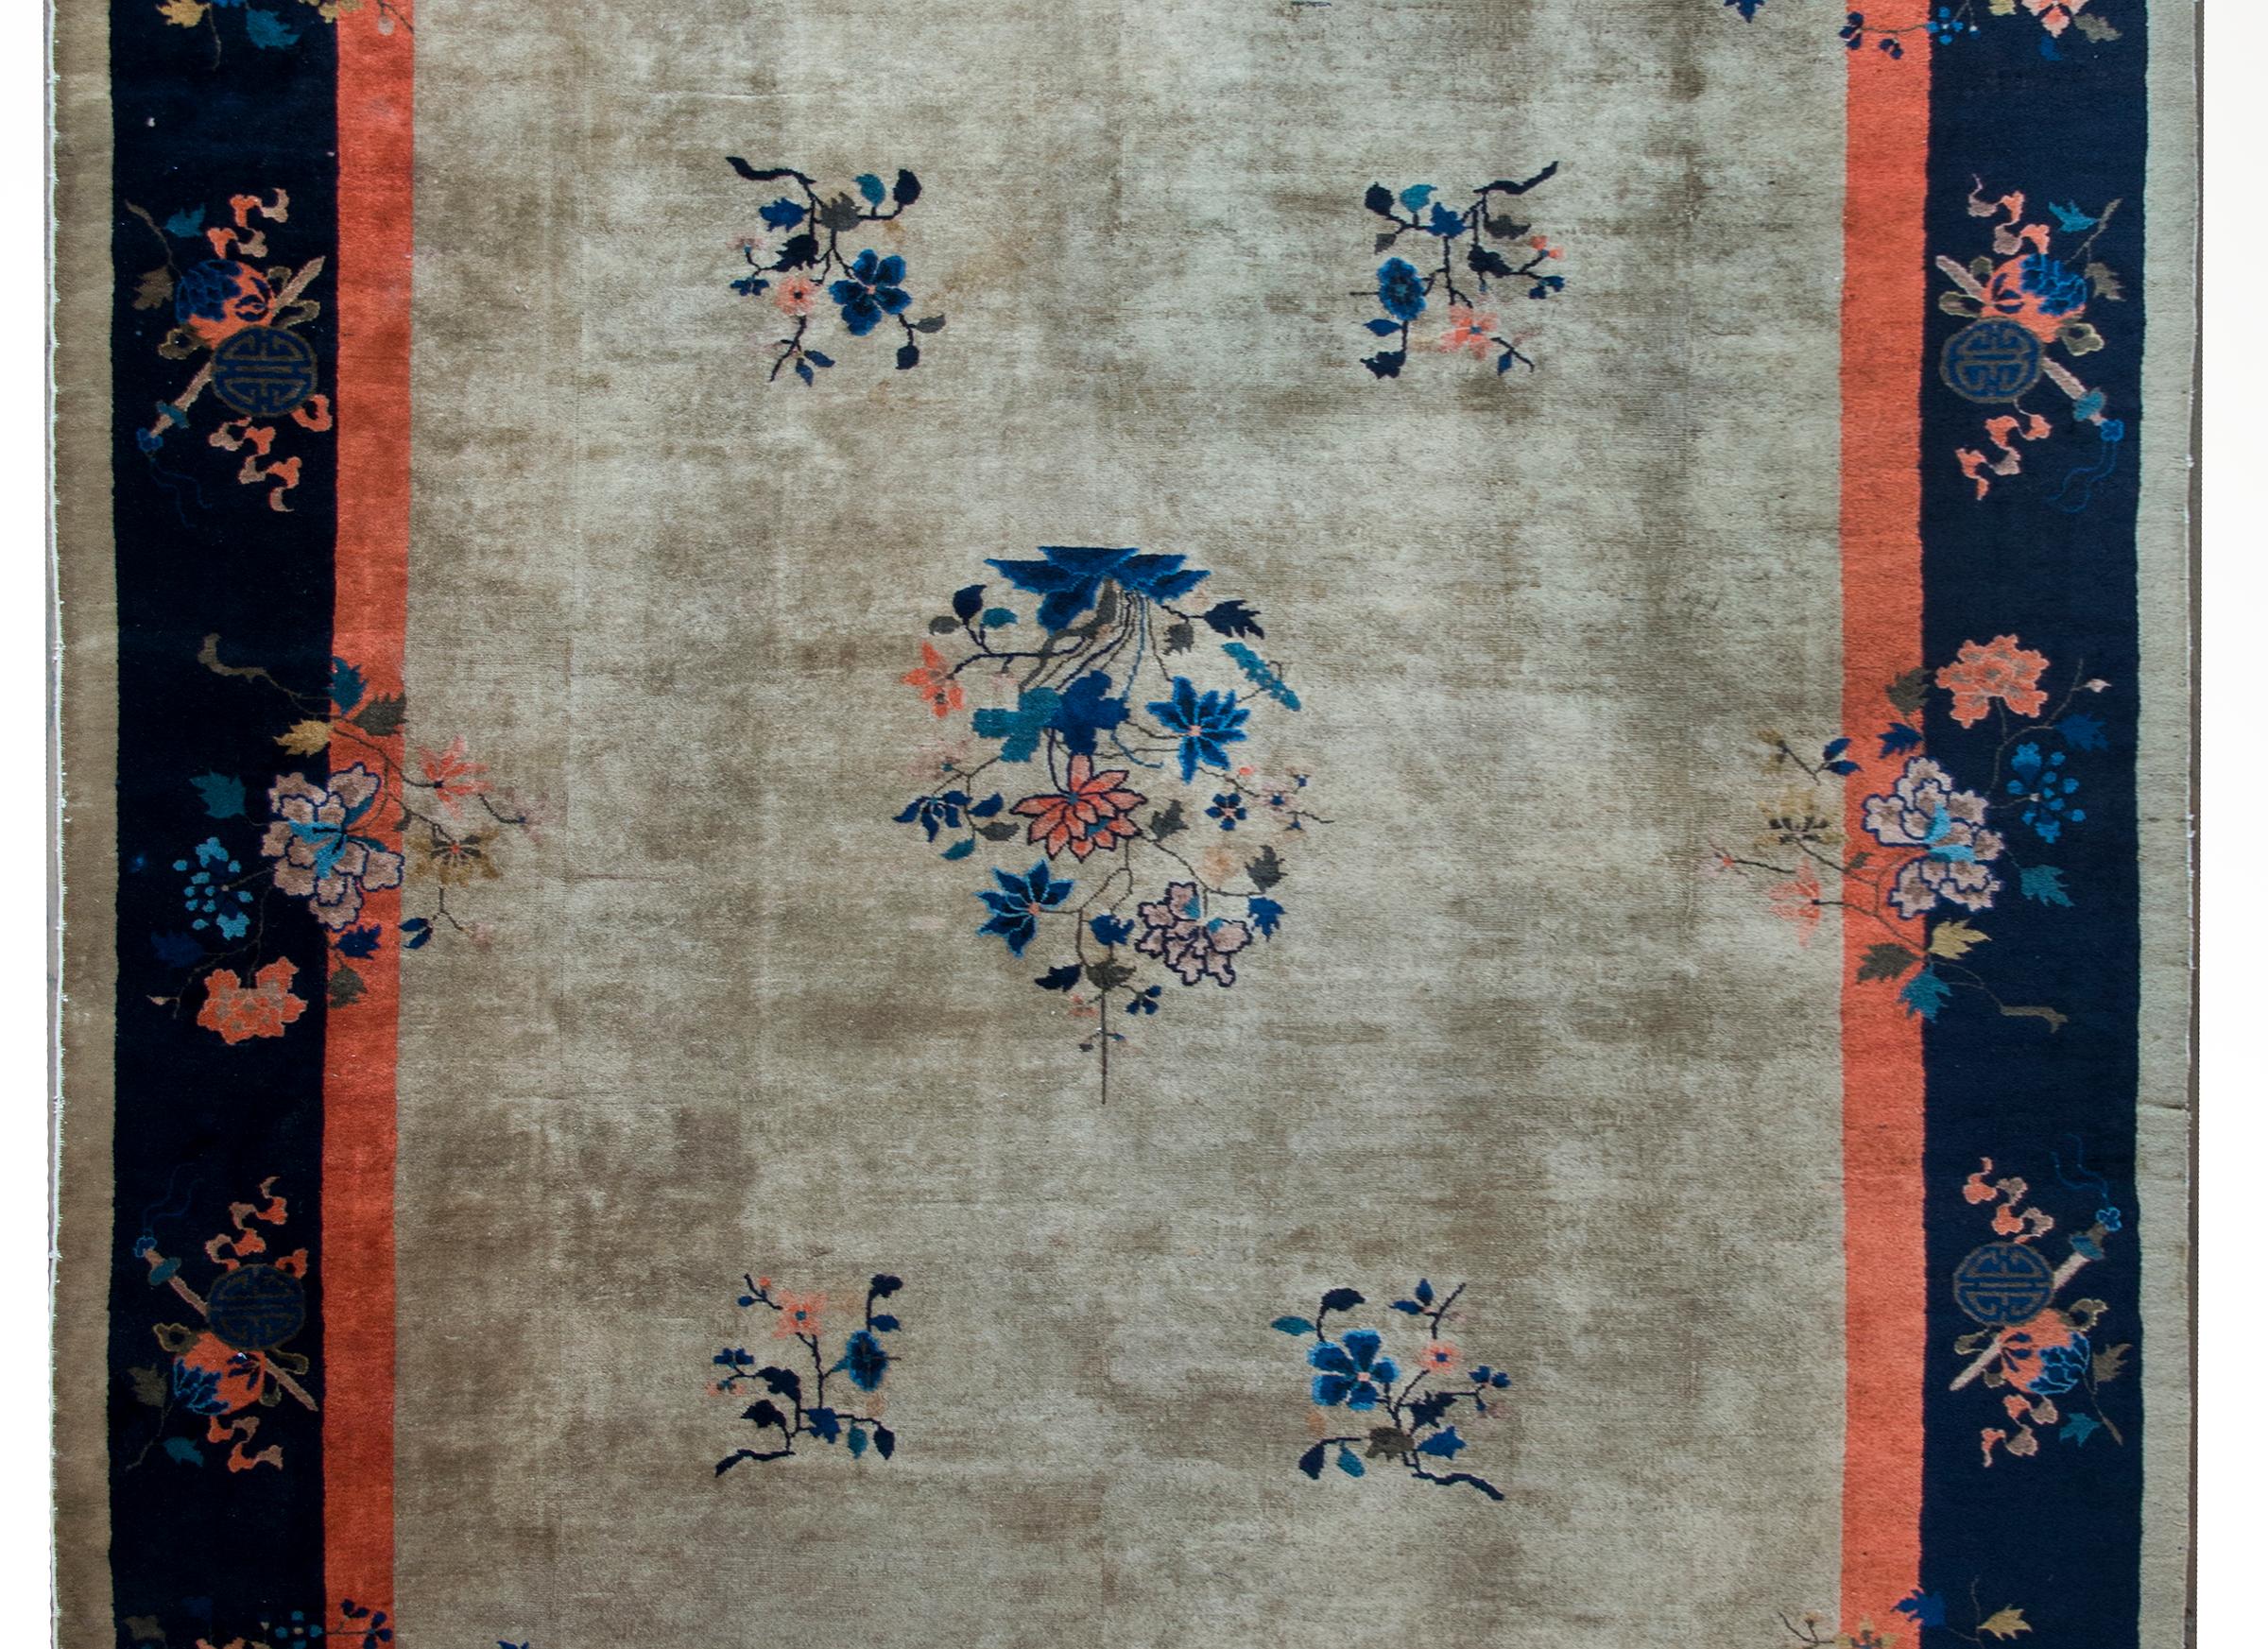 A beautiful early 20th century Chinese Feti rug with a gray field surrounded by a thin orange stripe a wide indigo stripe, and a thin gray striped border, and all overlaid with multi-colored auspicious flower clusters including peonies,